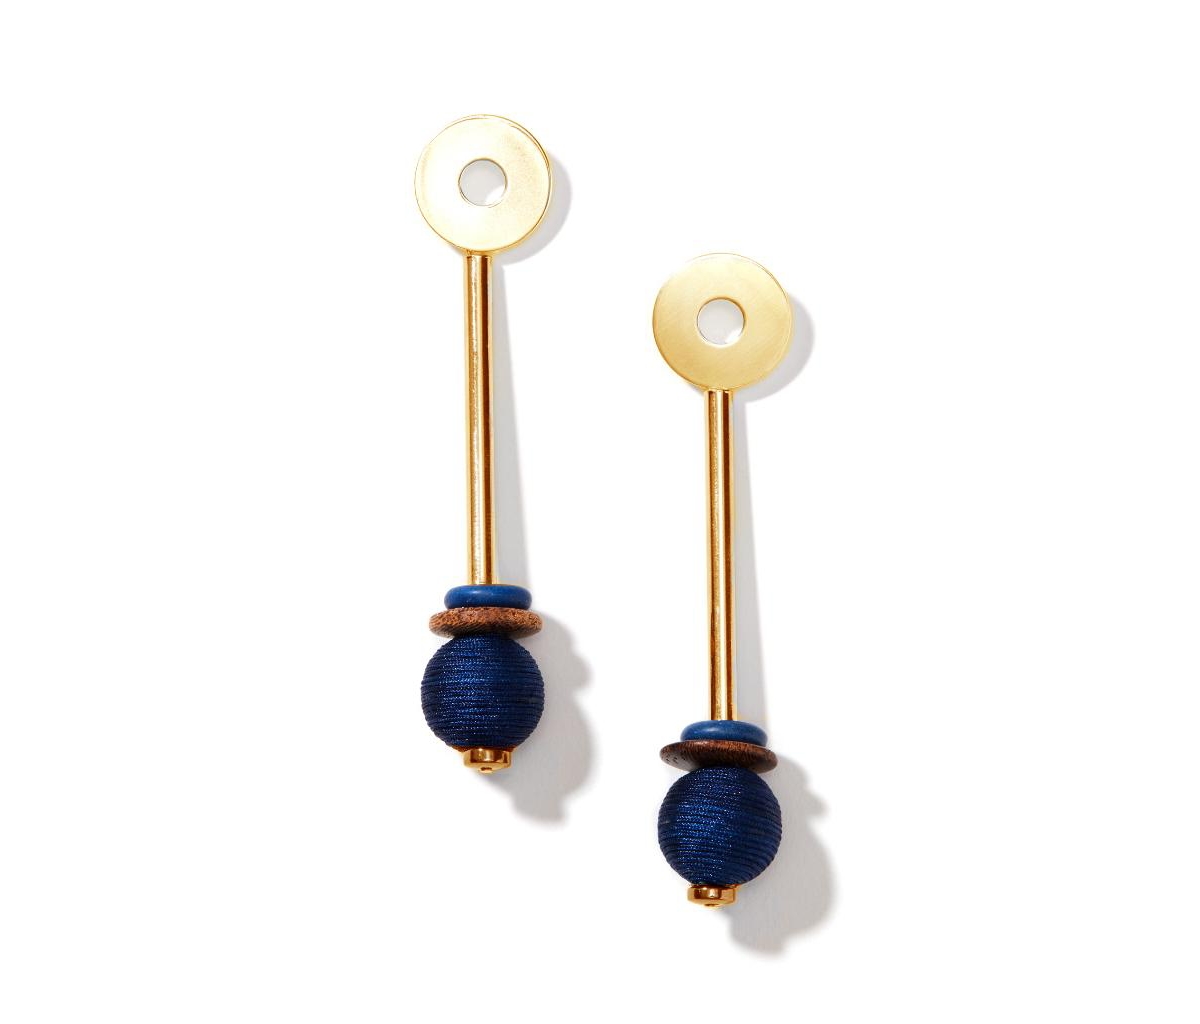 Nectar Nectar New York Navy Gemstone Drop Earrings In Gold Plated